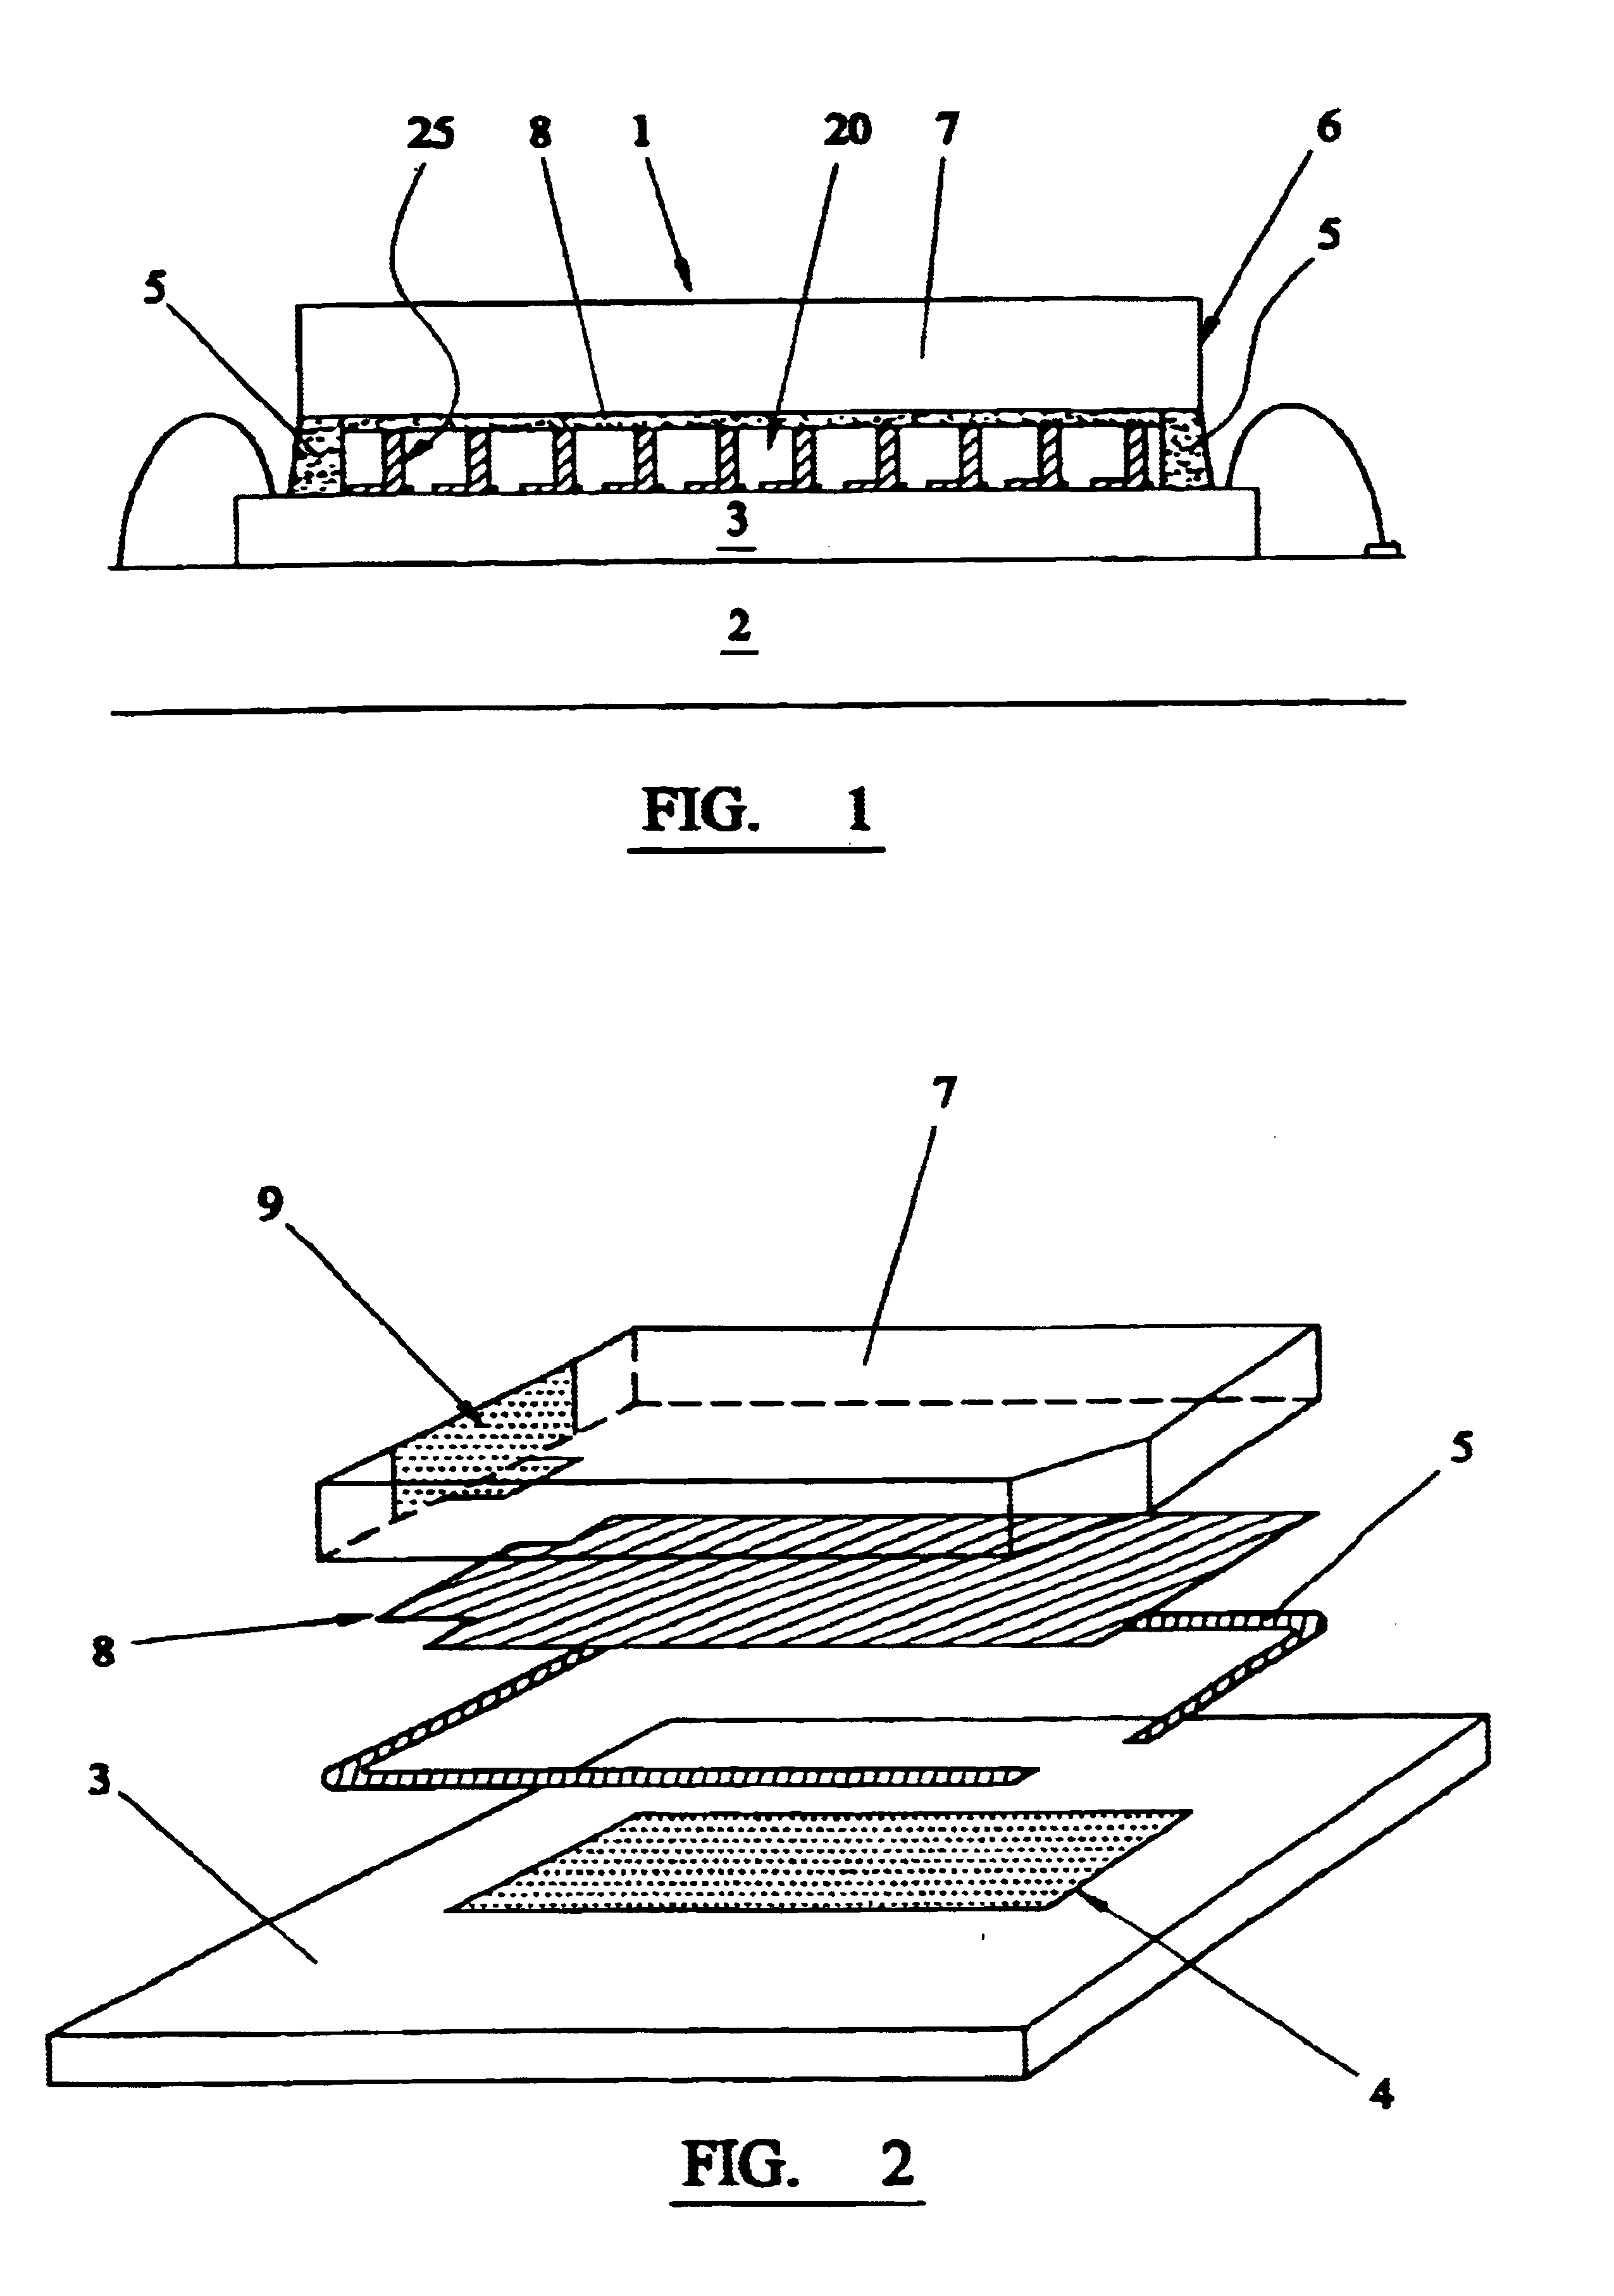 Methods of driving an array of optical elements